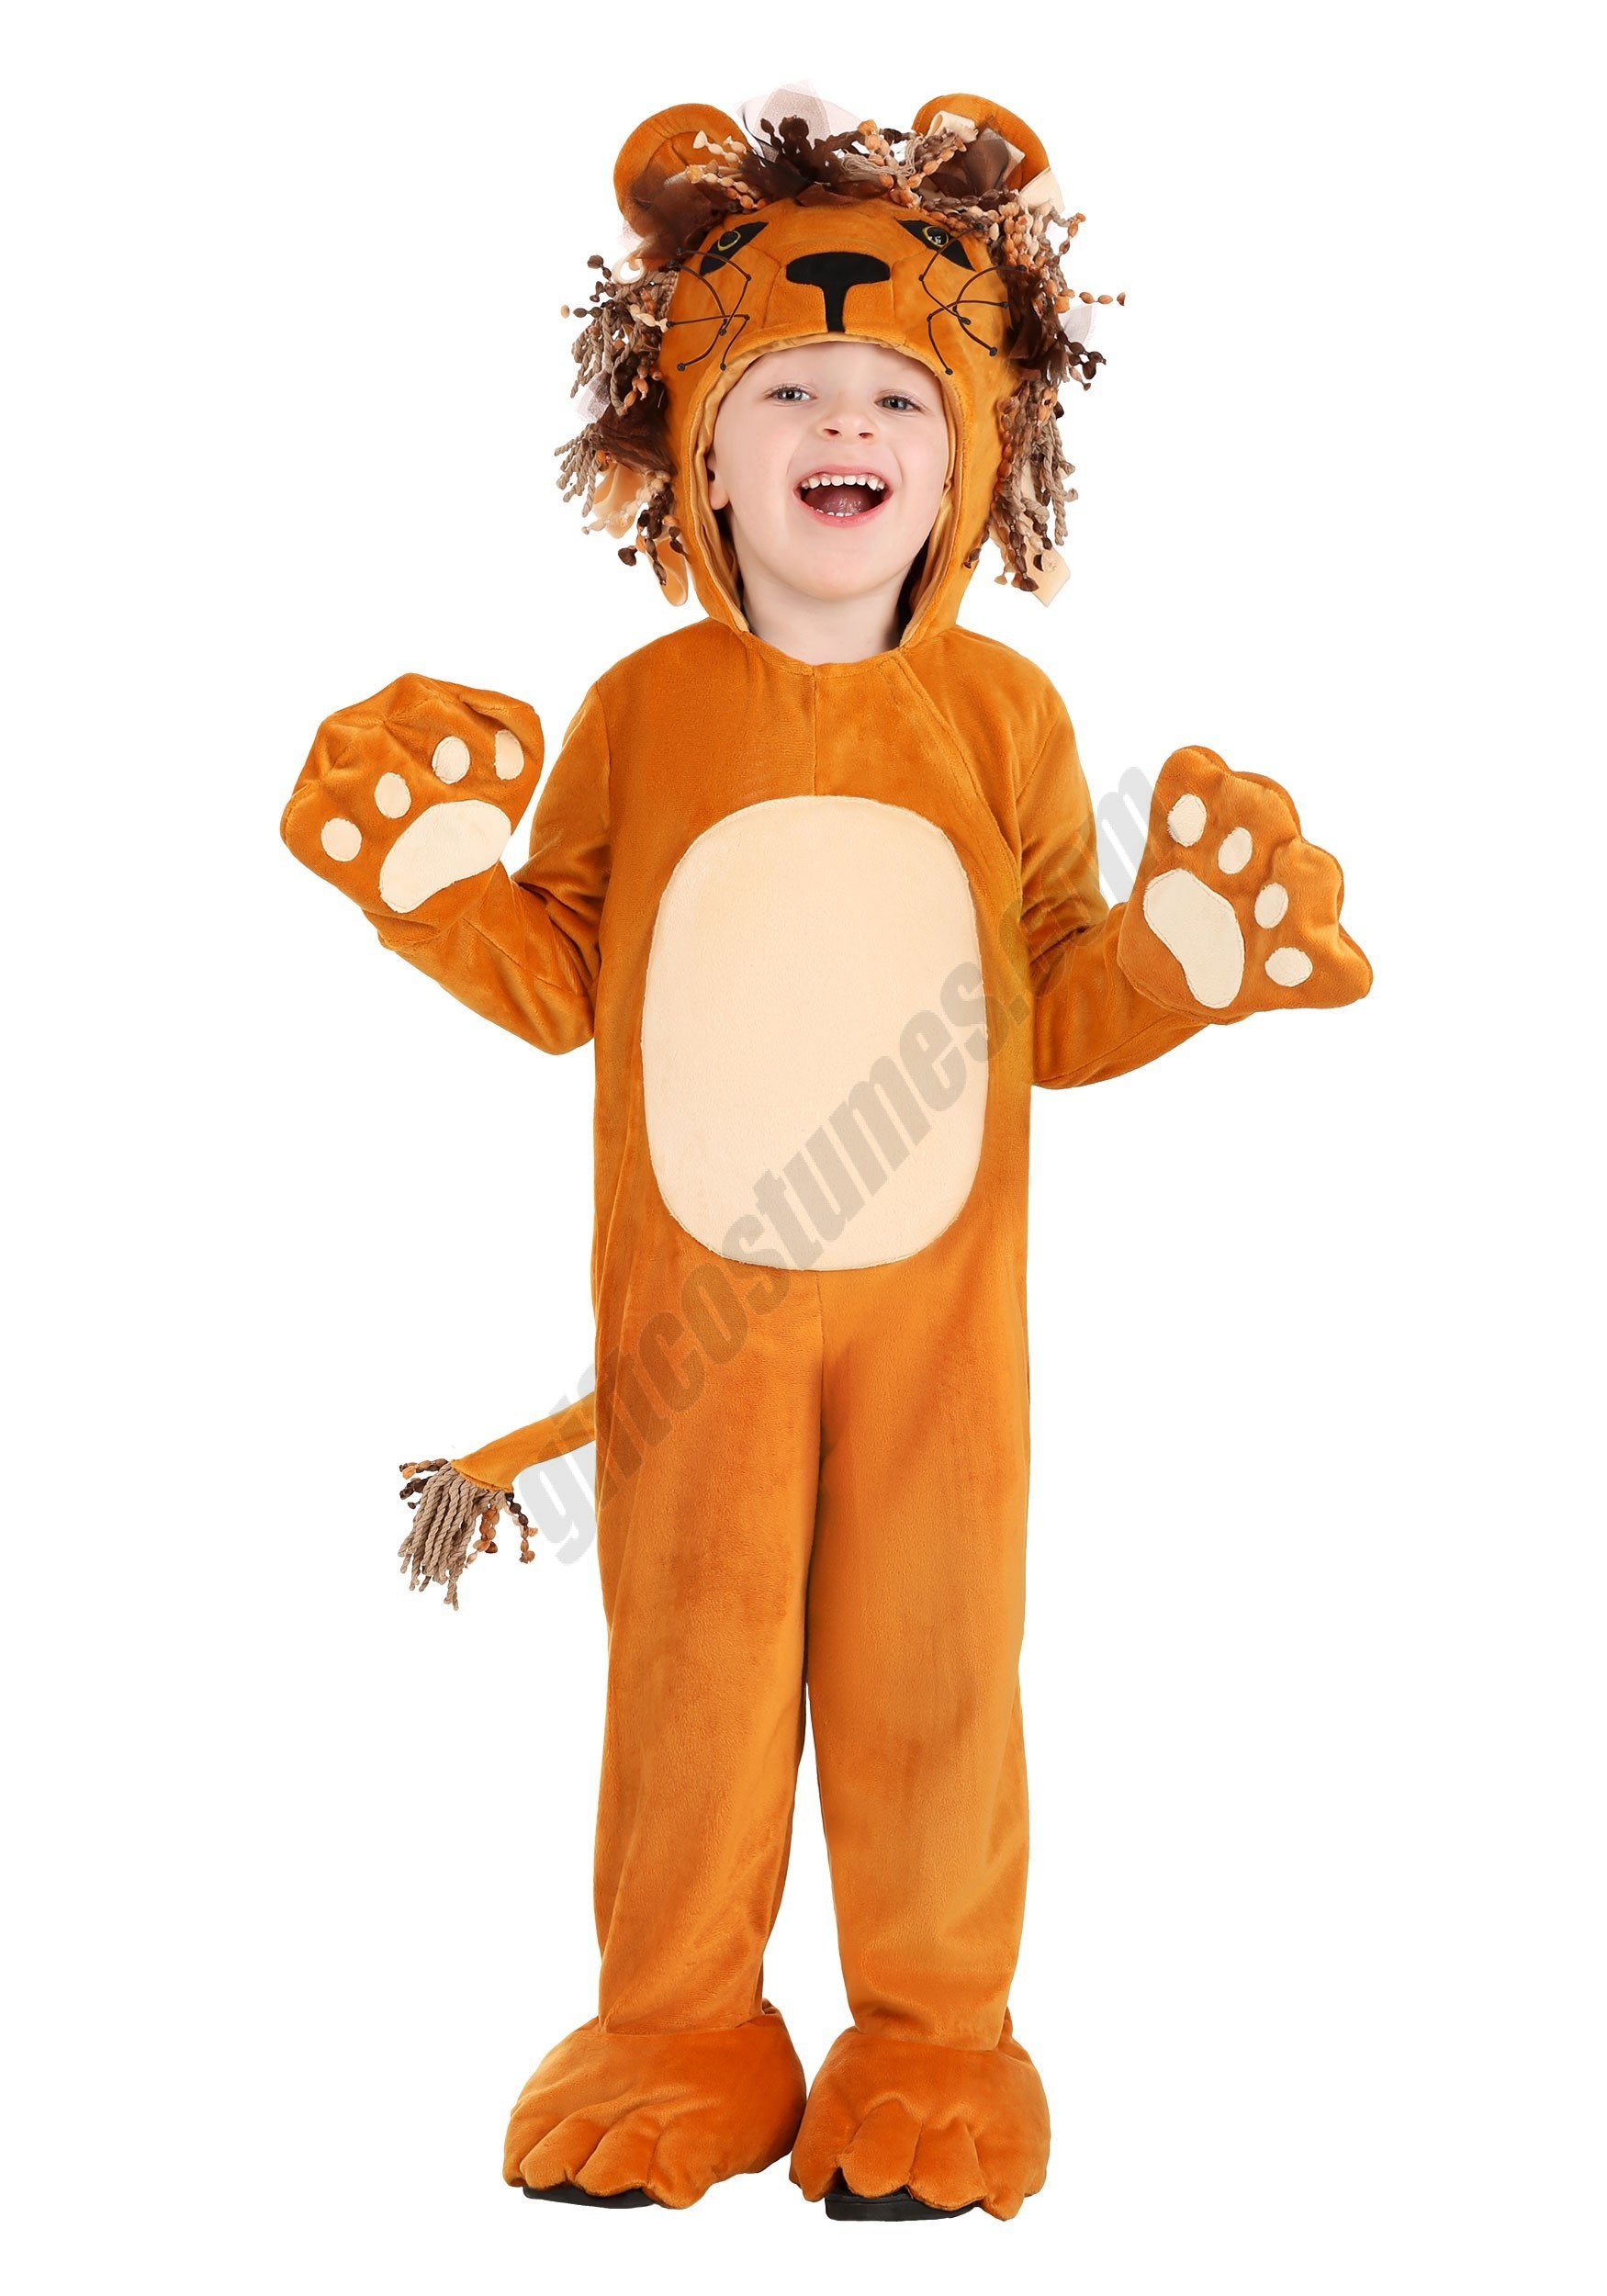 Roaring Lion - Toddler Costume Promotions - Roaring Lion - Toddler Costume Promotions